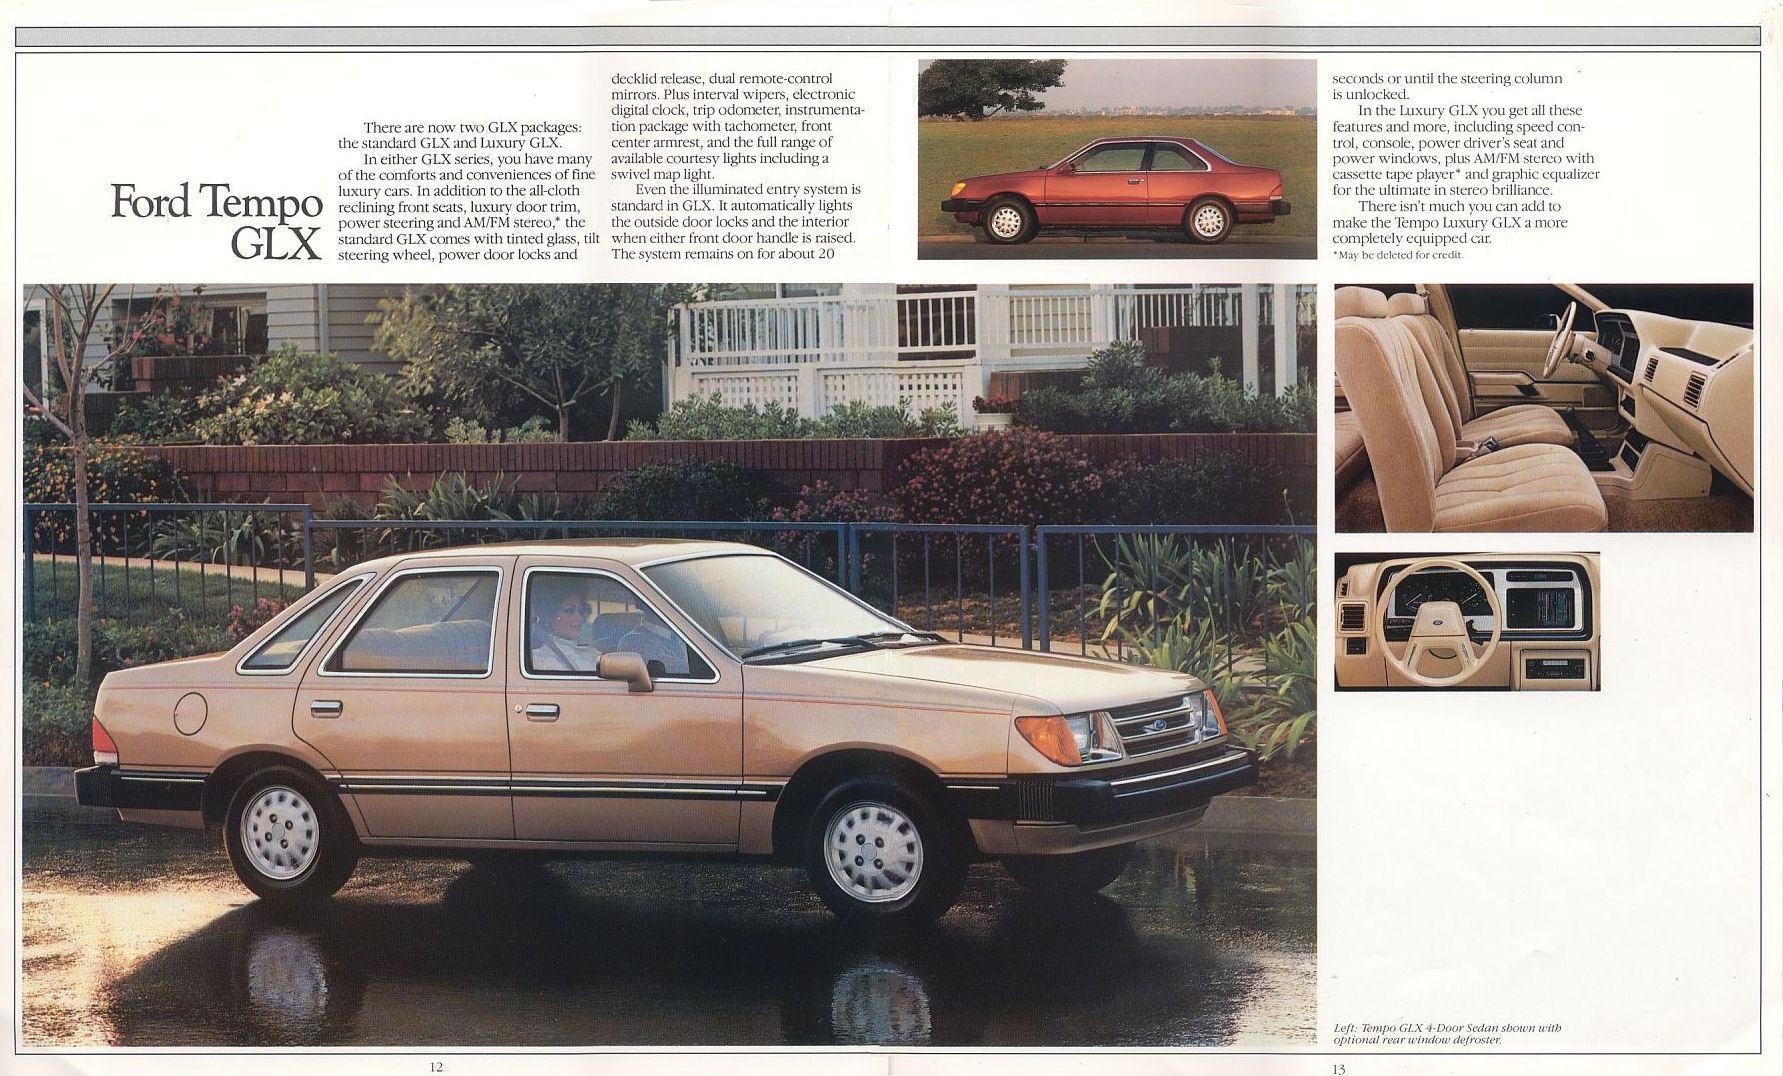 1985 Ford Tempo Brochure Page 15